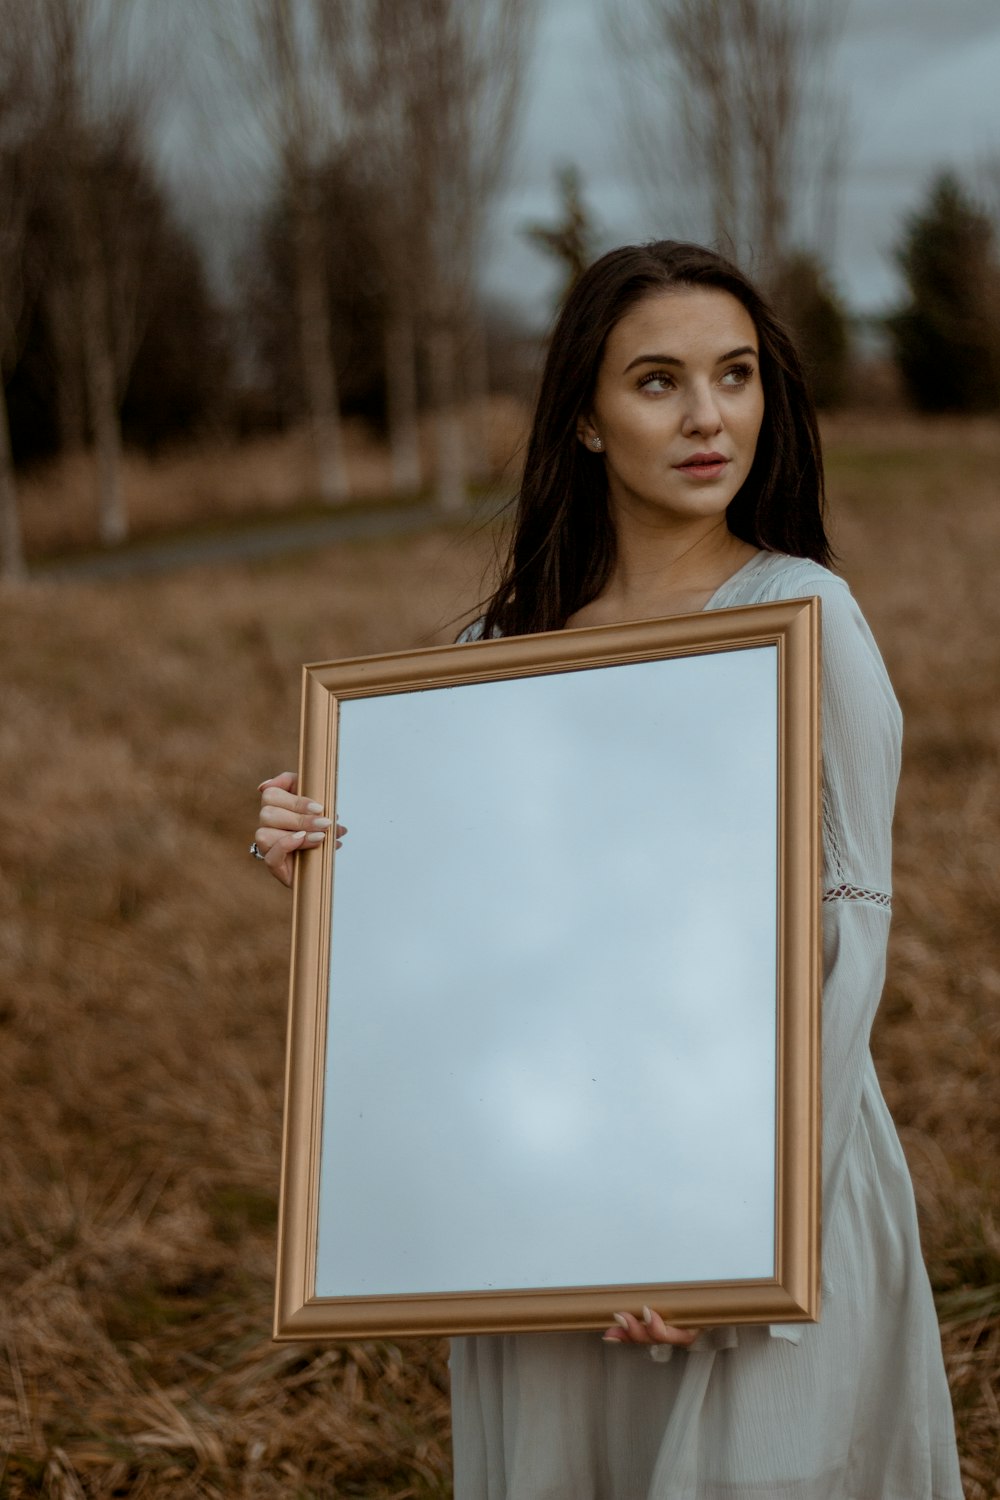 woman in white dress standing on grass field while holding photo frame